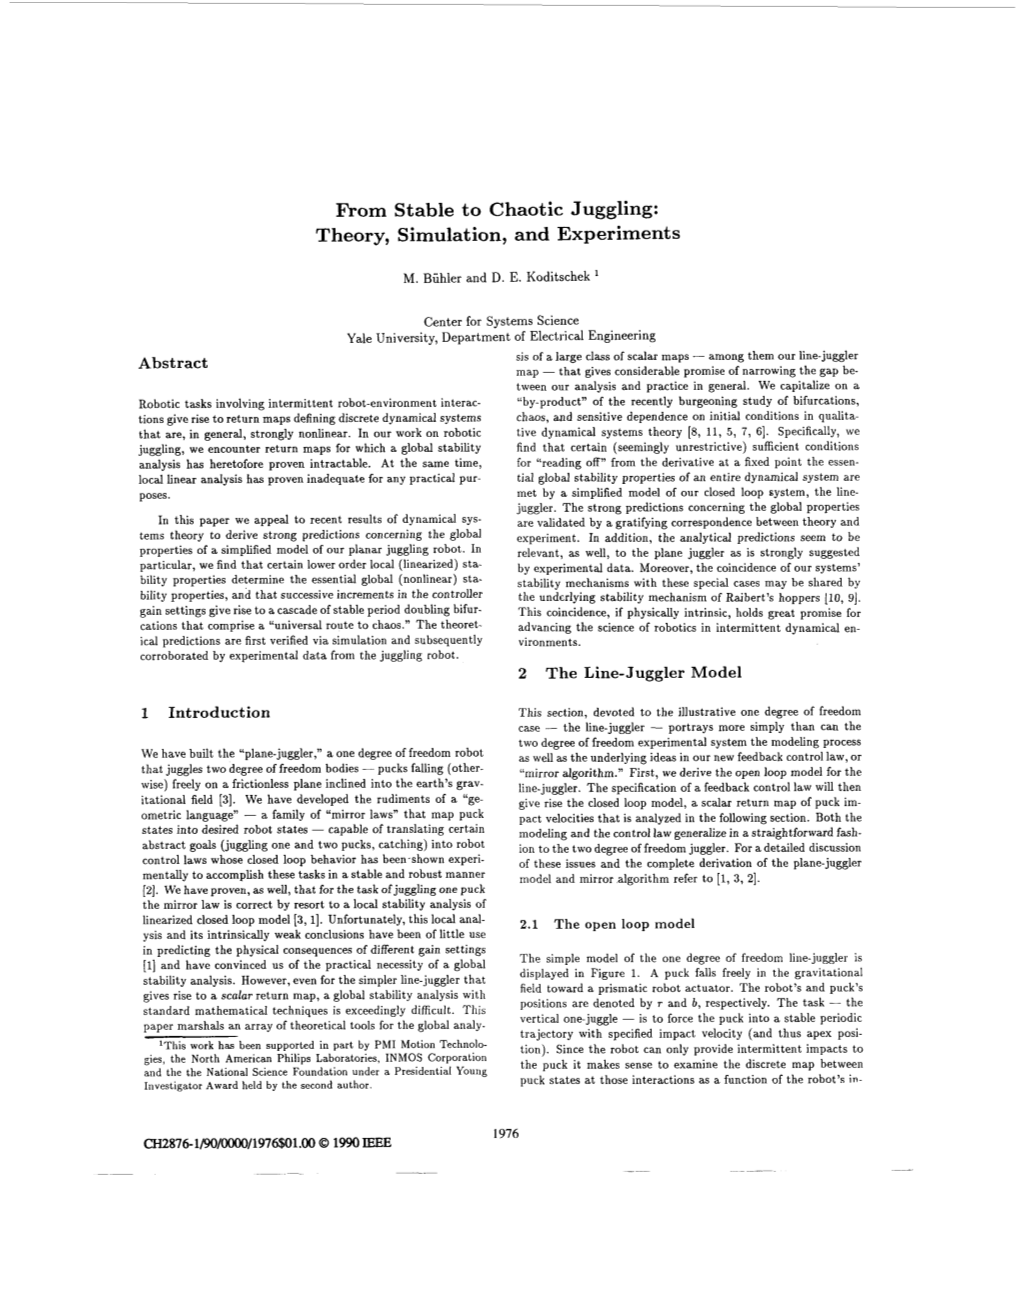 From Stable to Chaotic Juggling: Theory, Simulation, and Experiments